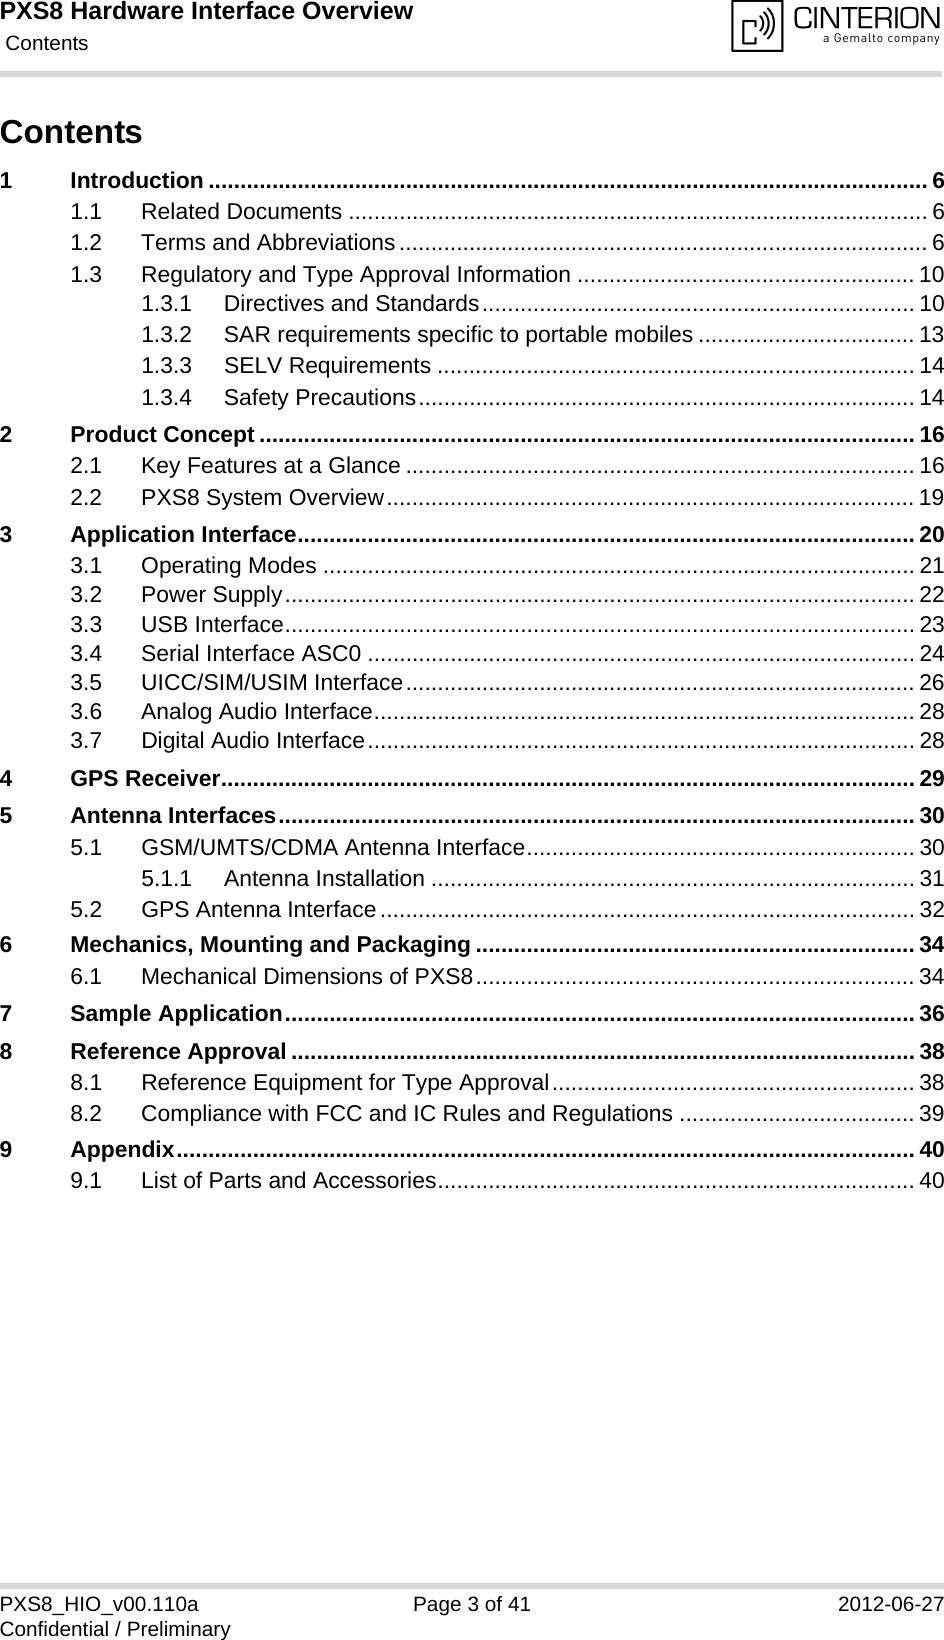 PXS8 Hardware Interface Overview Contents41PXS8_HIO_v00.110a Page 3 of 41 2012-06-27Confidential / PreliminaryContents1 Introduction ................................................................................................................. 61.1 Related Documents ........................................................................................... 61.2 Terms and Abbreviations................................................................................... 61.3 Regulatory and Type Approval Information ..................................................... 101.3.1 Directives and Standards.................................................................... 101.3.2 SAR requirements specific to portable mobiles .................................. 131.3.3 SELV Requirements ........................................................................... 141.3.4 Safety Precautions.............................................................................. 142 Product Concept ....................................................................................................... 162.1 Key Features at a Glance ................................................................................ 162.2 PXS8 System Overview................................................................................... 193 Application Interface................................................................................................. 203.1 Operating Modes ............................................................................................. 213.2 Power Supply................................................................................................... 223.3 USB Interface................................................................................................... 233.4 Serial Interface ASC0 ...................................................................................... 243.5 UICC/SIM/USIM Interface................................................................................ 263.6 Analog Audio Interface..................................................................................... 283.7 Digital Audio Interface...................................................................................... 284 GPS Receiver............................................................................................................. 295 Antenna Interfaces.................................................................................................... 305.1 GSM/UMTS/CDMA Antenna Interface............................................................. 305.1.1 Antenna Installation ............................................................................ 315.2 GPS Antenna Interface.................................................................................... 326 Mechanics, Mounting and Packaging ..................................................................... 346.1 Mechanical Dimensions of PXS8..................................................................... 347 Sample Application................................................................................................... 368 Reference Approval .................................................................................................. 388.1 Reference Equipment for Type Approval......................................................... 388.2 Compliance with FCC and IC Rules and Regulations ..................................... 399 Appendix.................................................................................................................... 409.1 List of Parts and Accessories........................................................................... 40